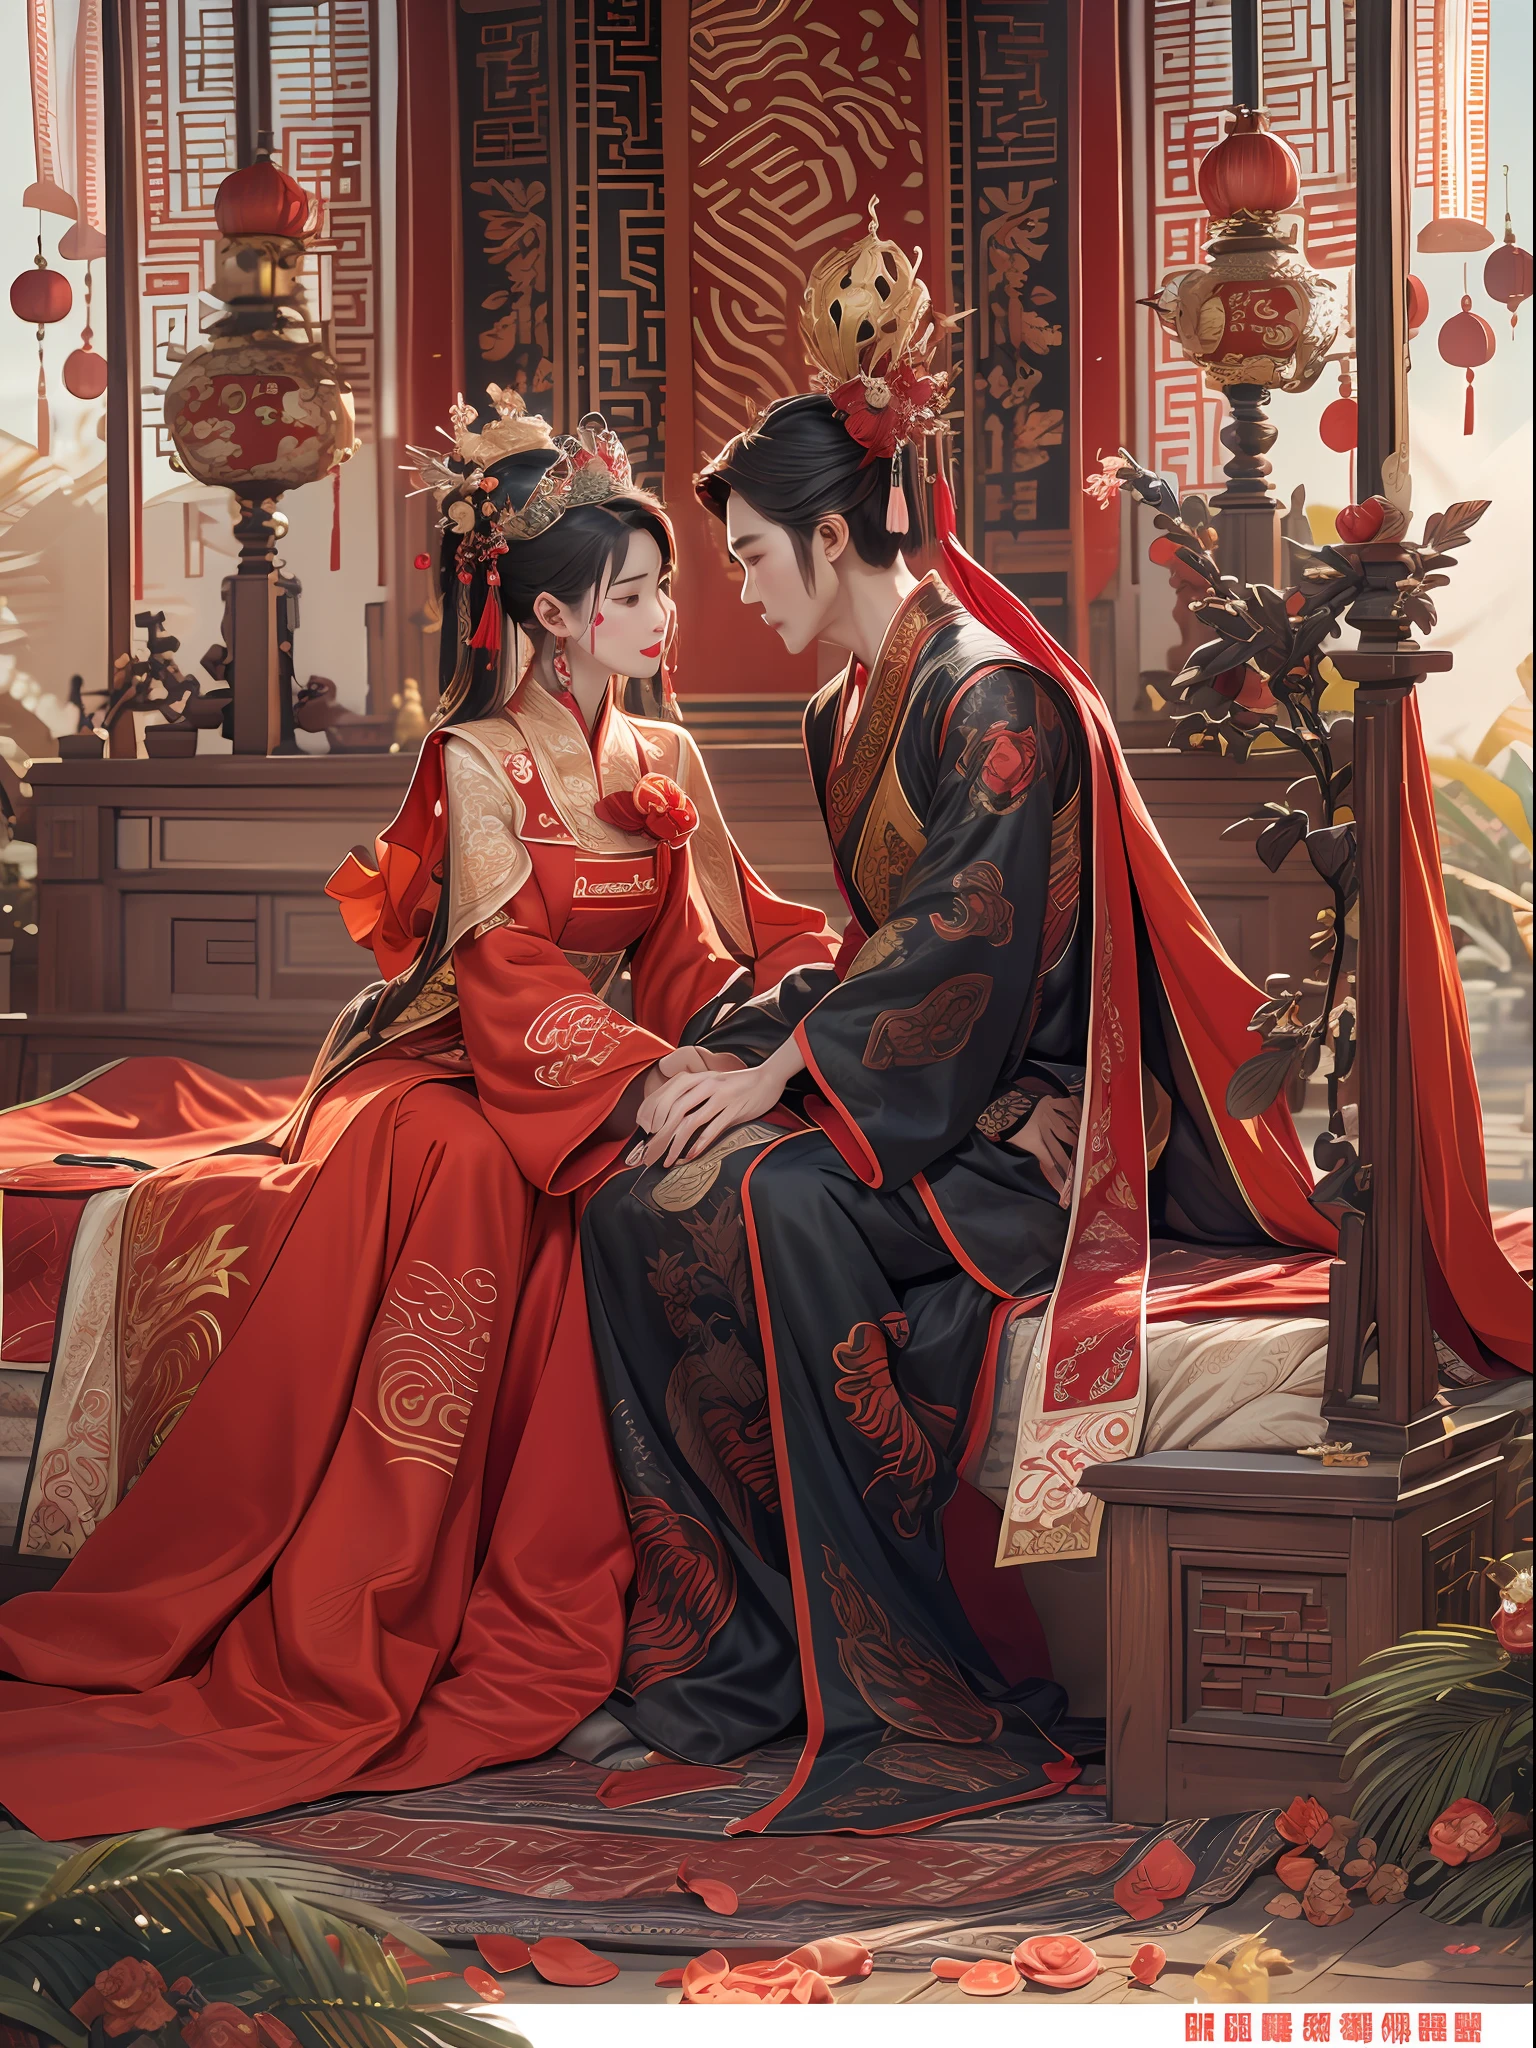 Best quality: 1.1), (Realistic: 1.1), (Photography: 1.1), (highly details: 1.1), A man wears a red and gold dress，Woman with a crown on her head, A hair stick, (sitting on red bed), Blushing, Shy, black_Hair, crown, Looking down, (2 red candles), Chinese_clothes, Curtains, Earrings, Hair_decorations, Hanfu, interiors, jewelry, Long_Sleeves, Red dress, Redlip, nipple tassels, (Red quilt), (red palace: 1.2),